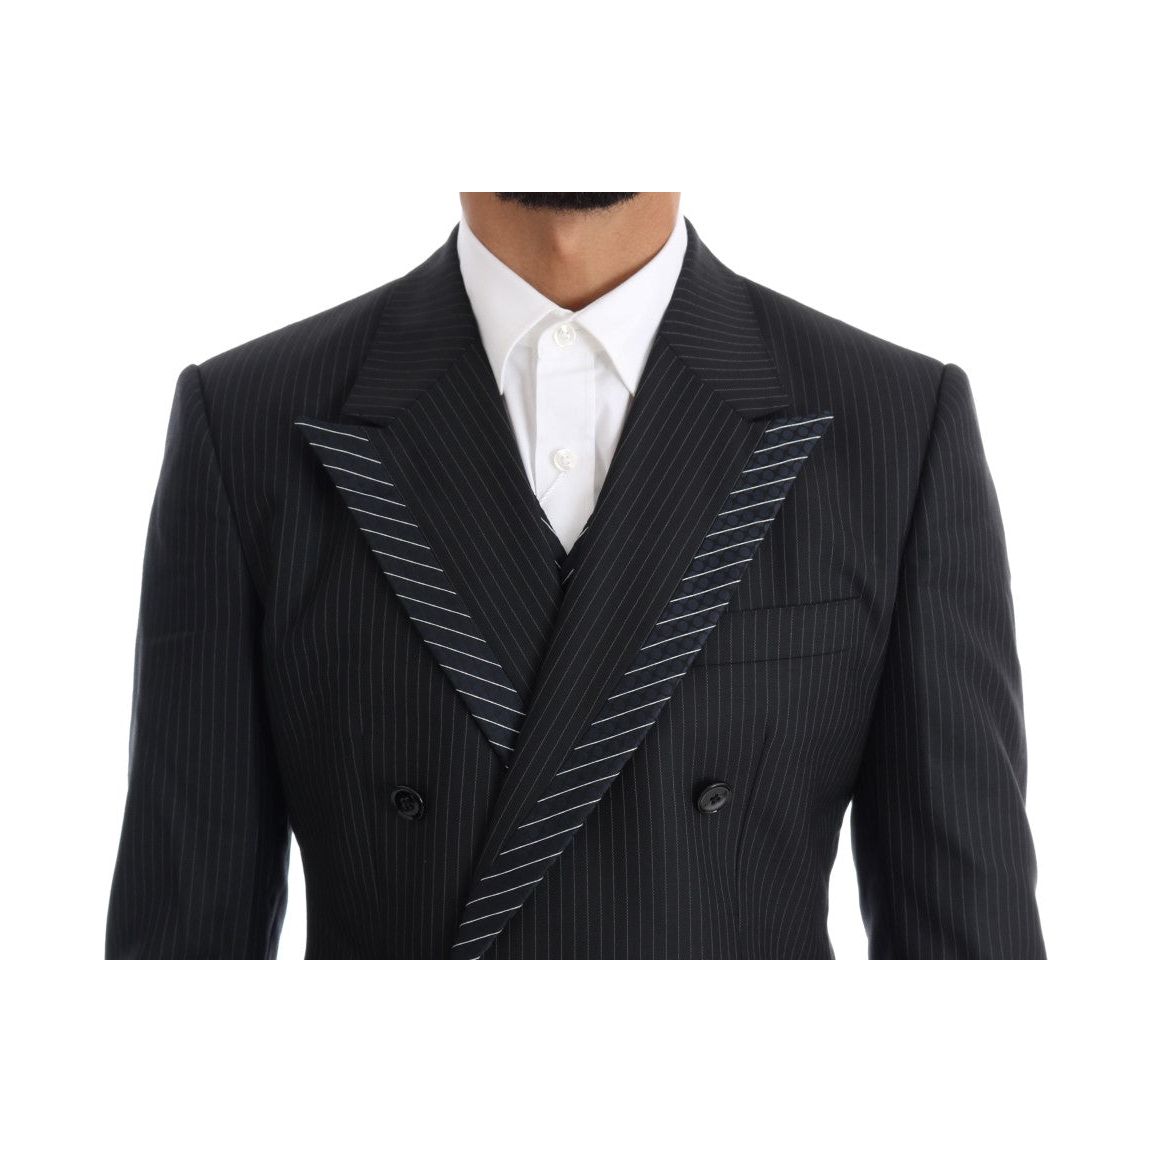 Dolce & Gabbana Elegant Gray Striped Wool Silk Men's 3-Piece Suit Suit gray-double-breasted-3-piece-suit 460447-gray-double-breasted-3-piece-suit-3.jpg